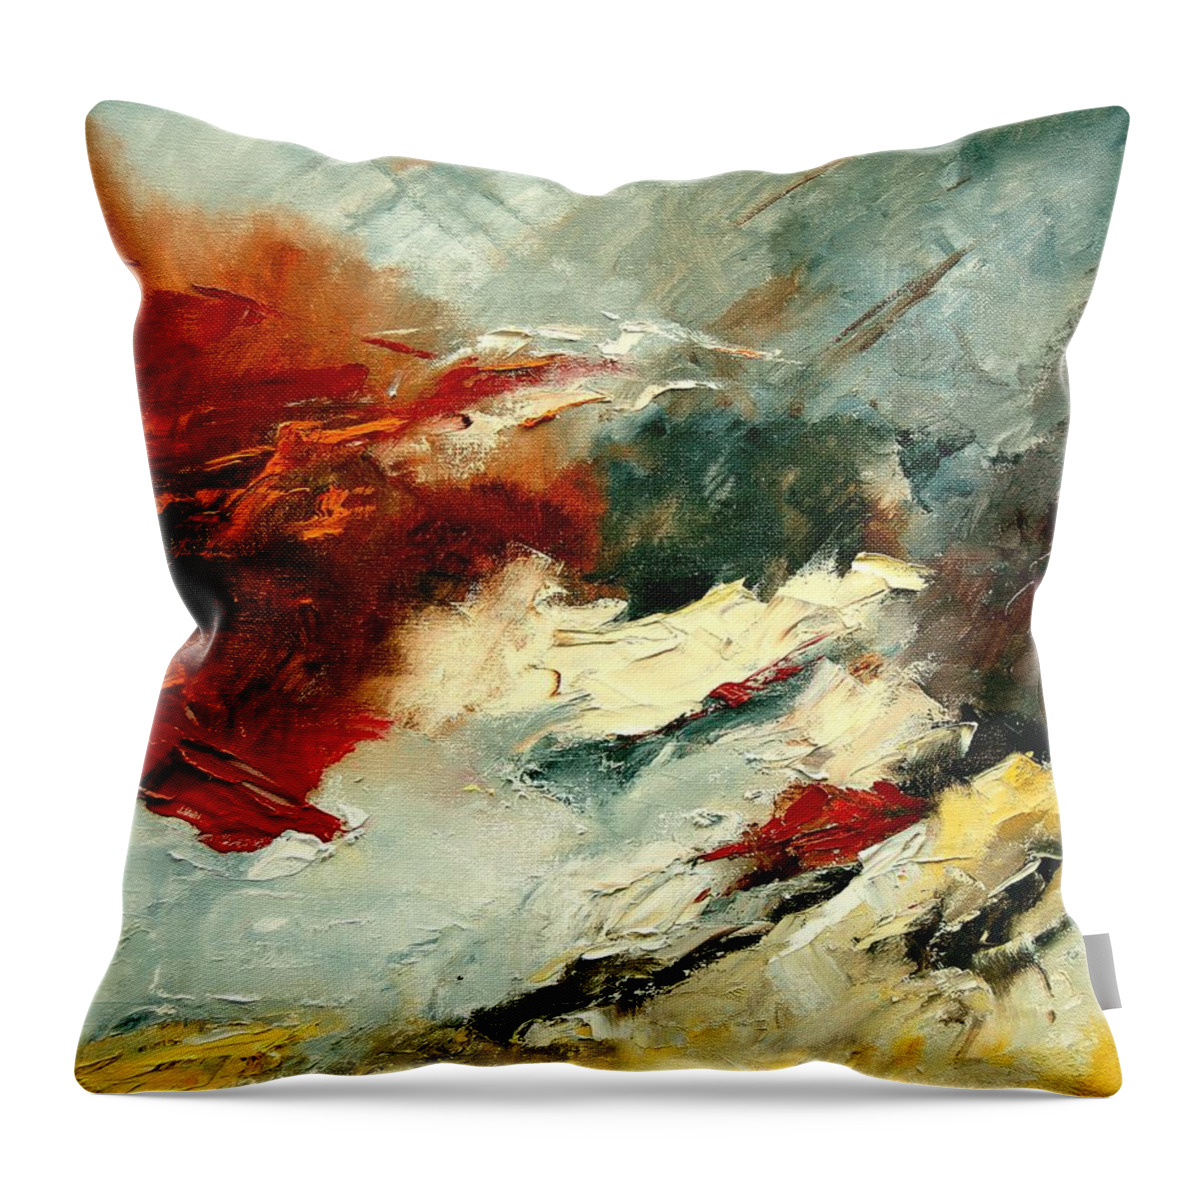 Abstract Throw Pillow featuring the painting Abstract 9 #1 by Pol Ledent